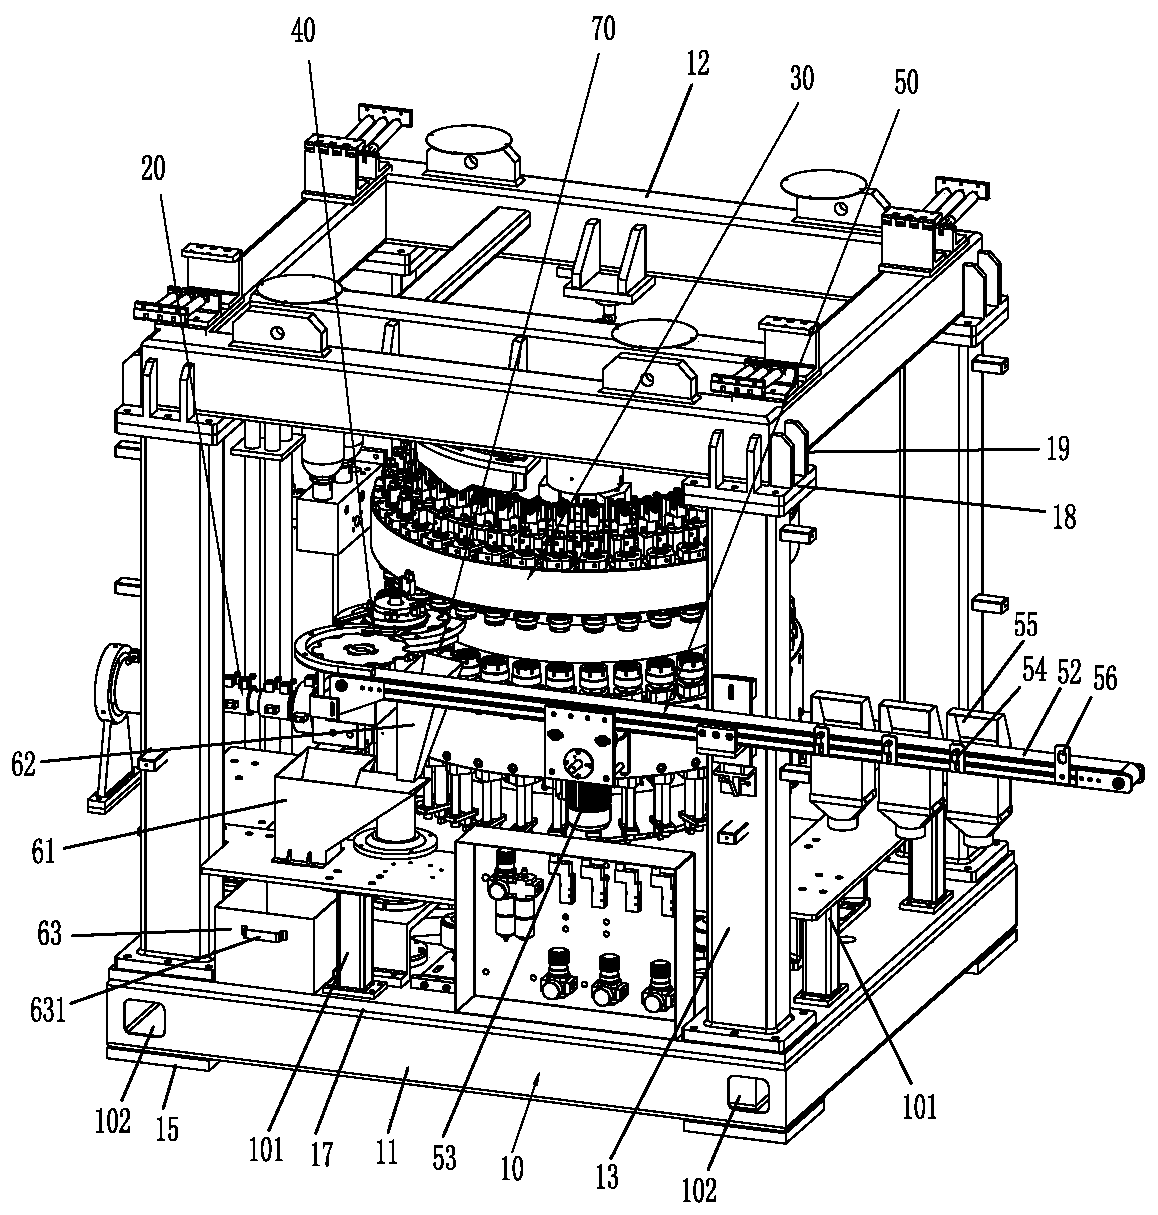 Stable and smooth molding machine structure with low failure rate